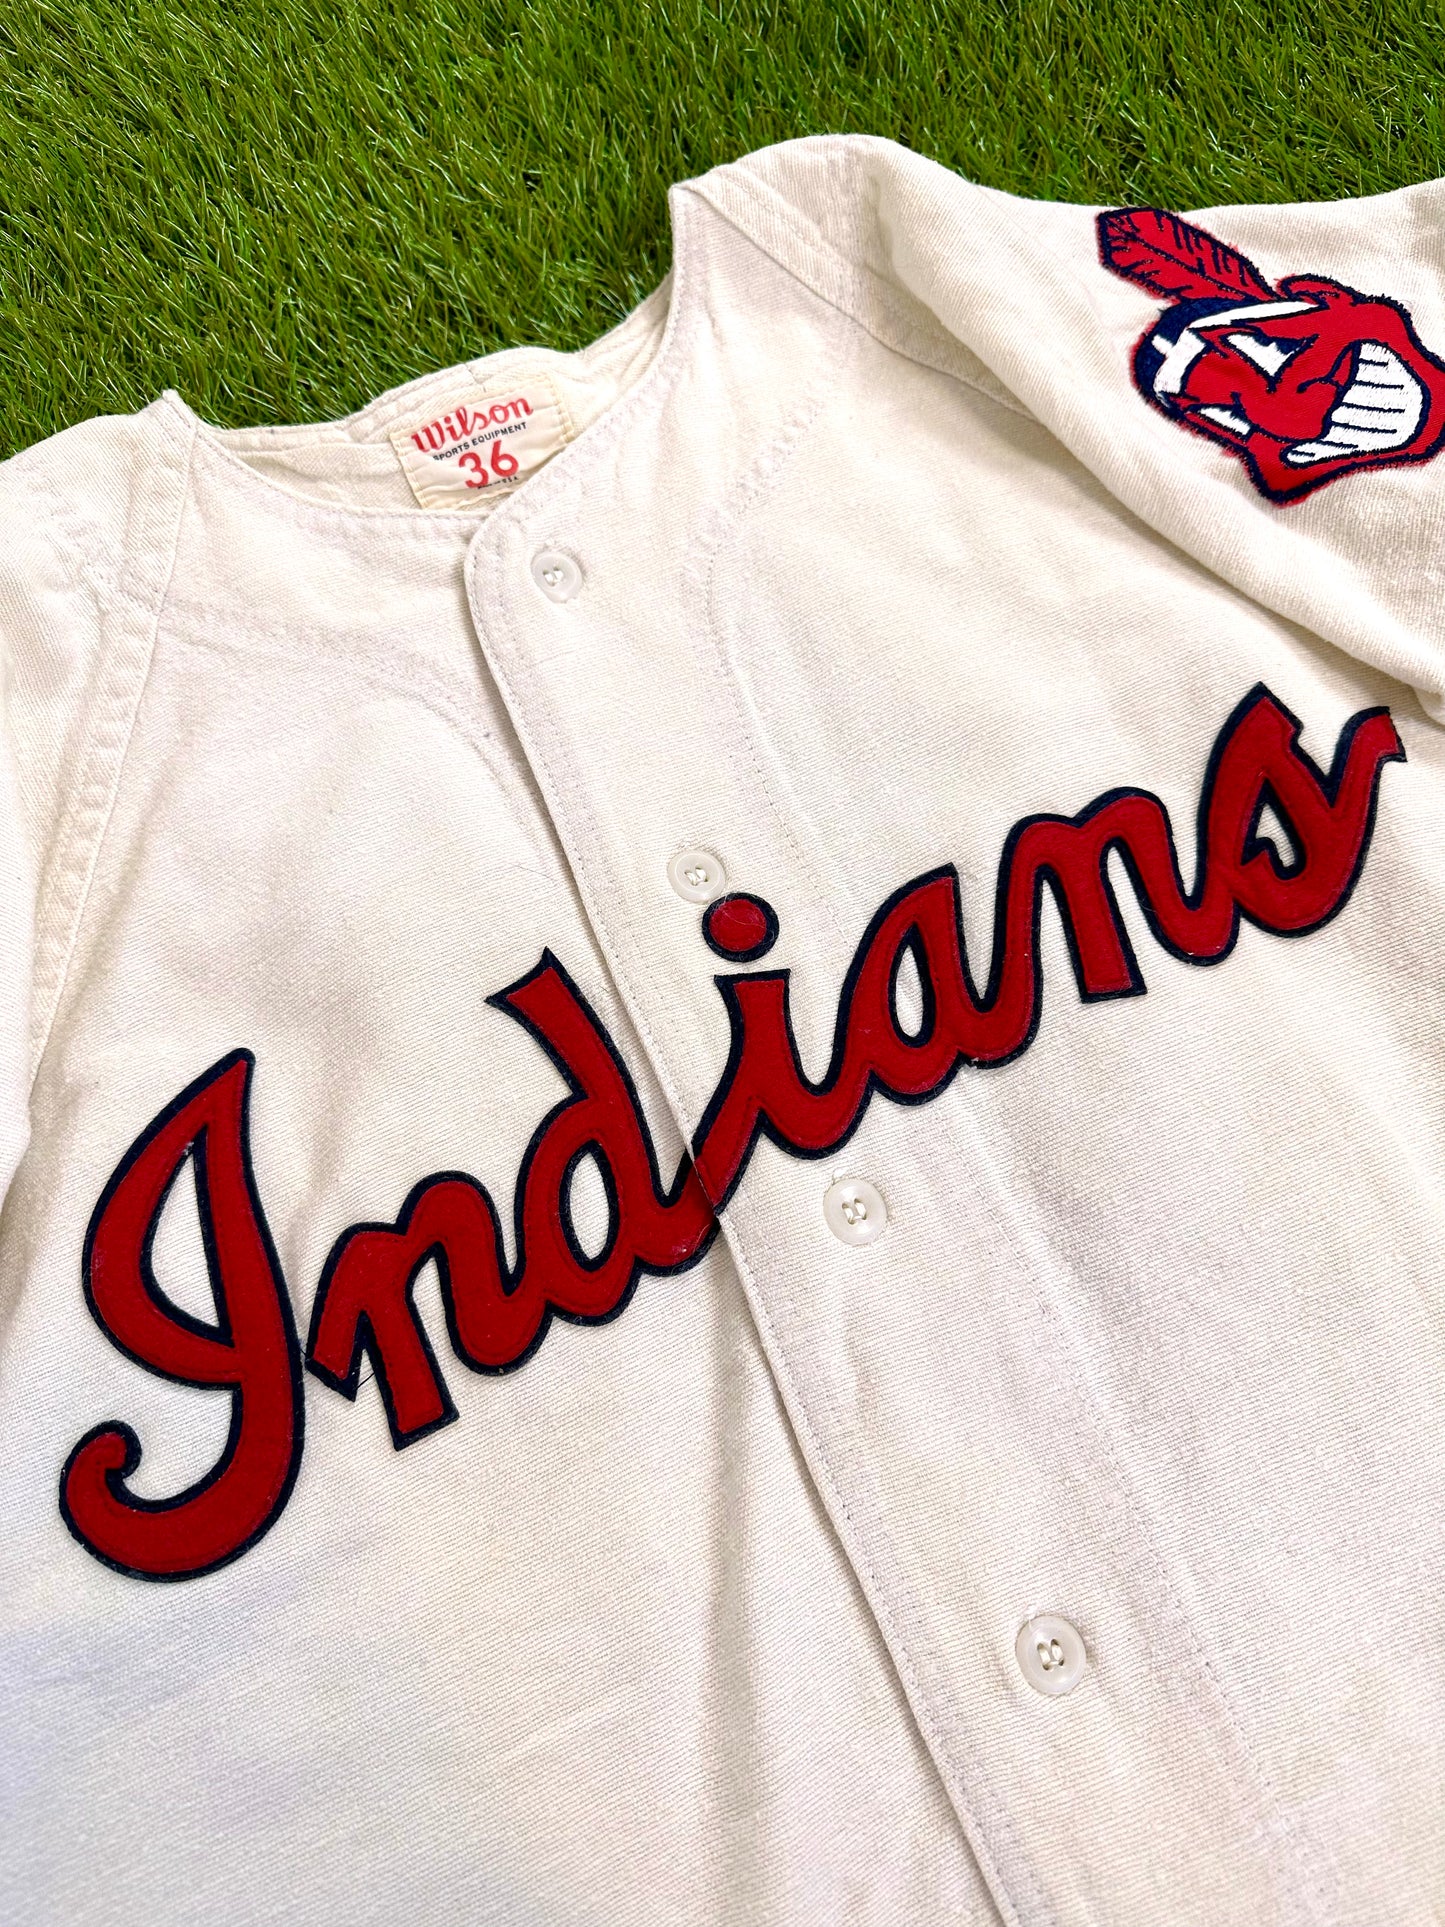 Cleveland Indians Larry Doby 1955 MLB Baseball Jersey (36/Small)